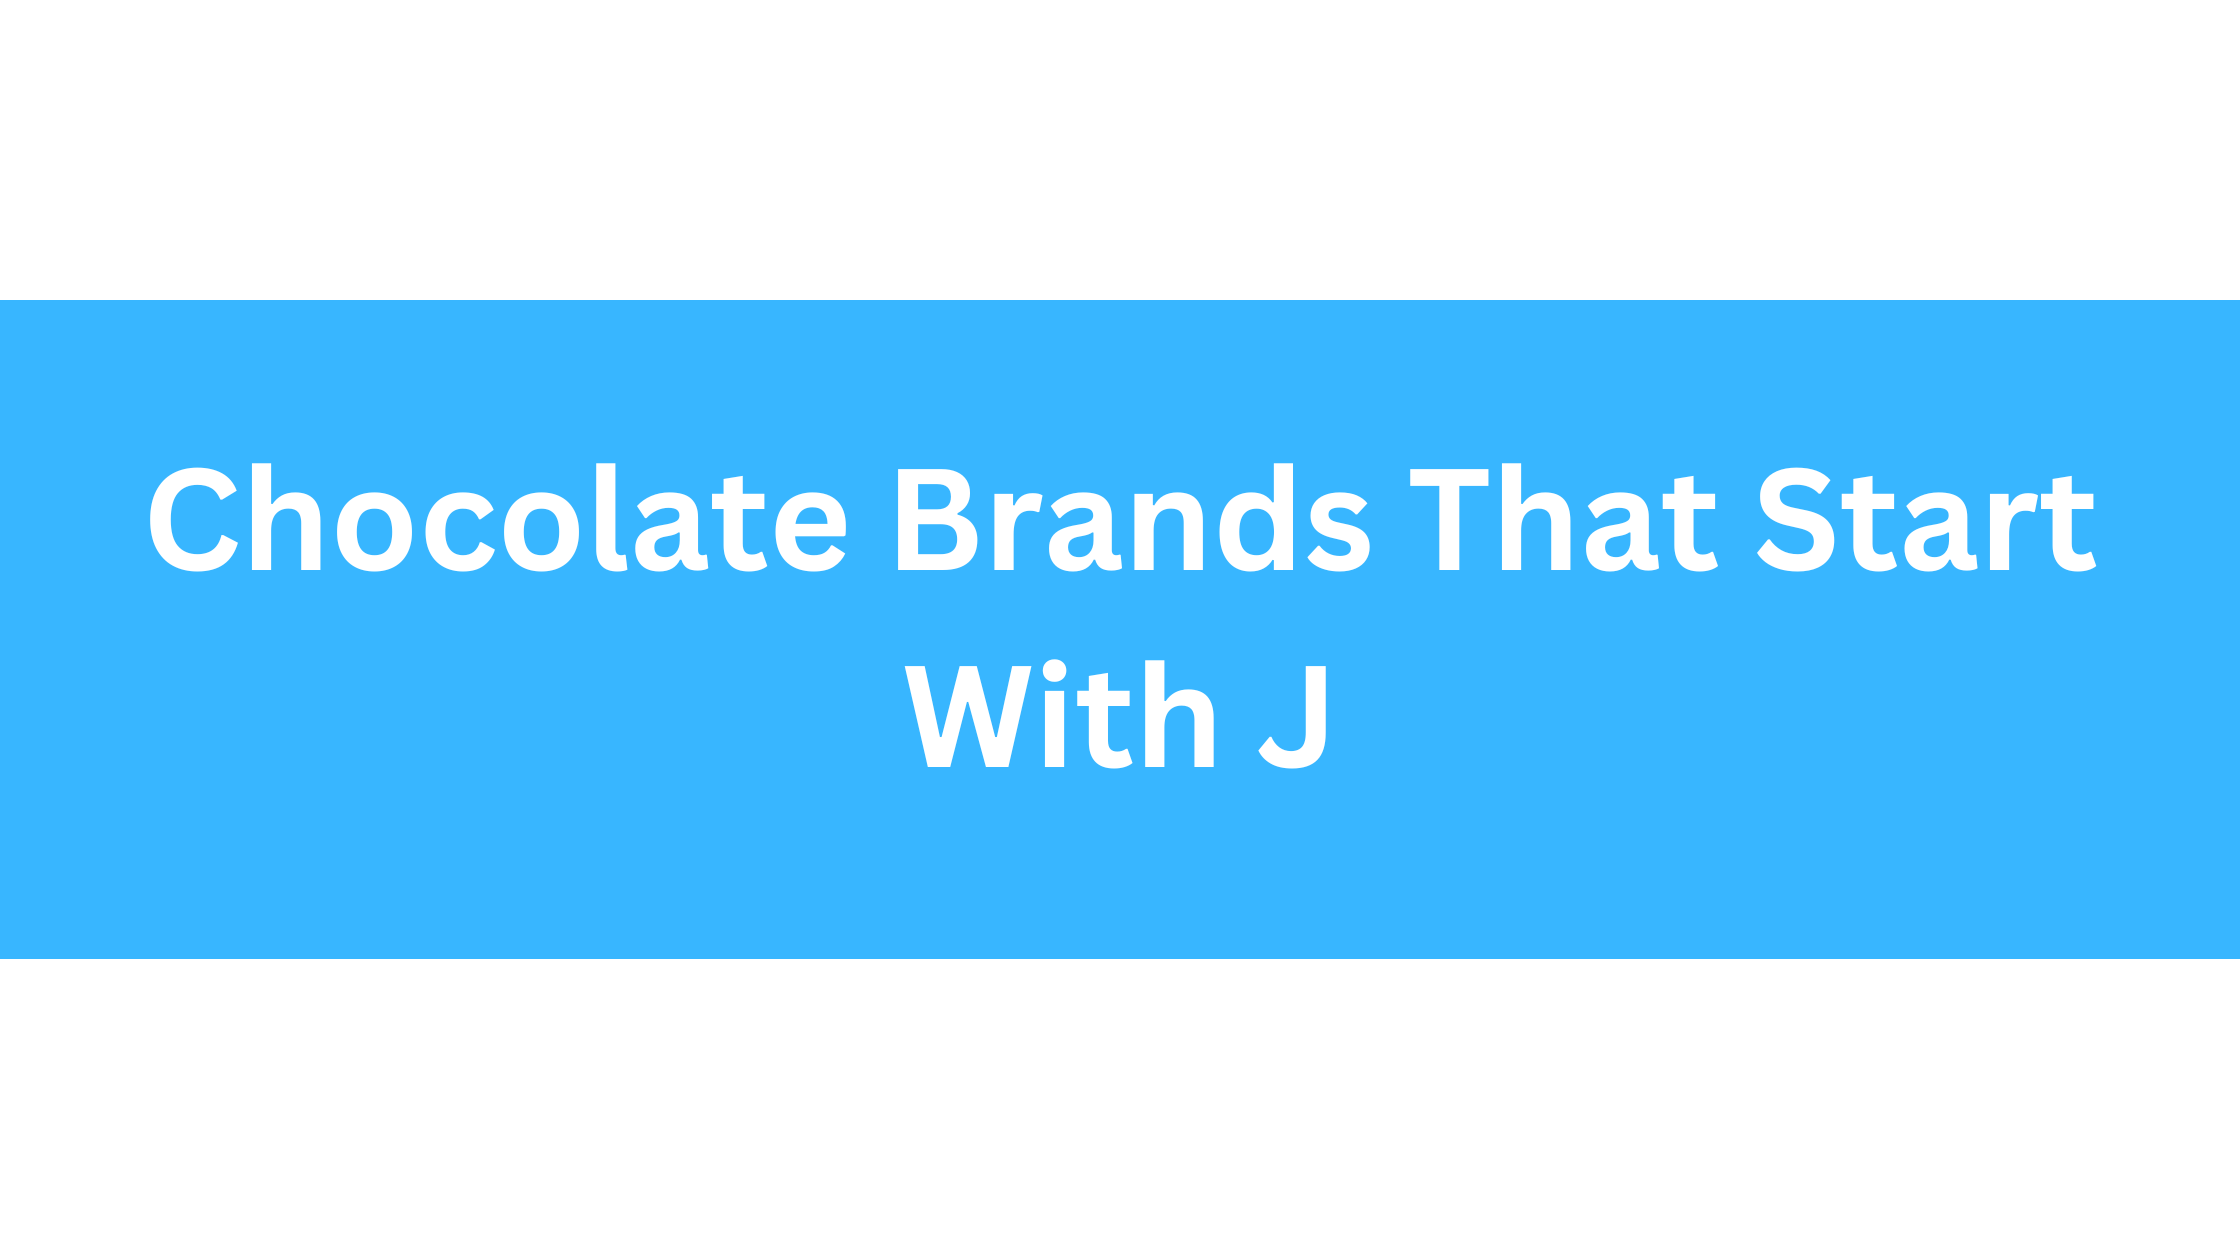 Chocolate Brands That Start With J